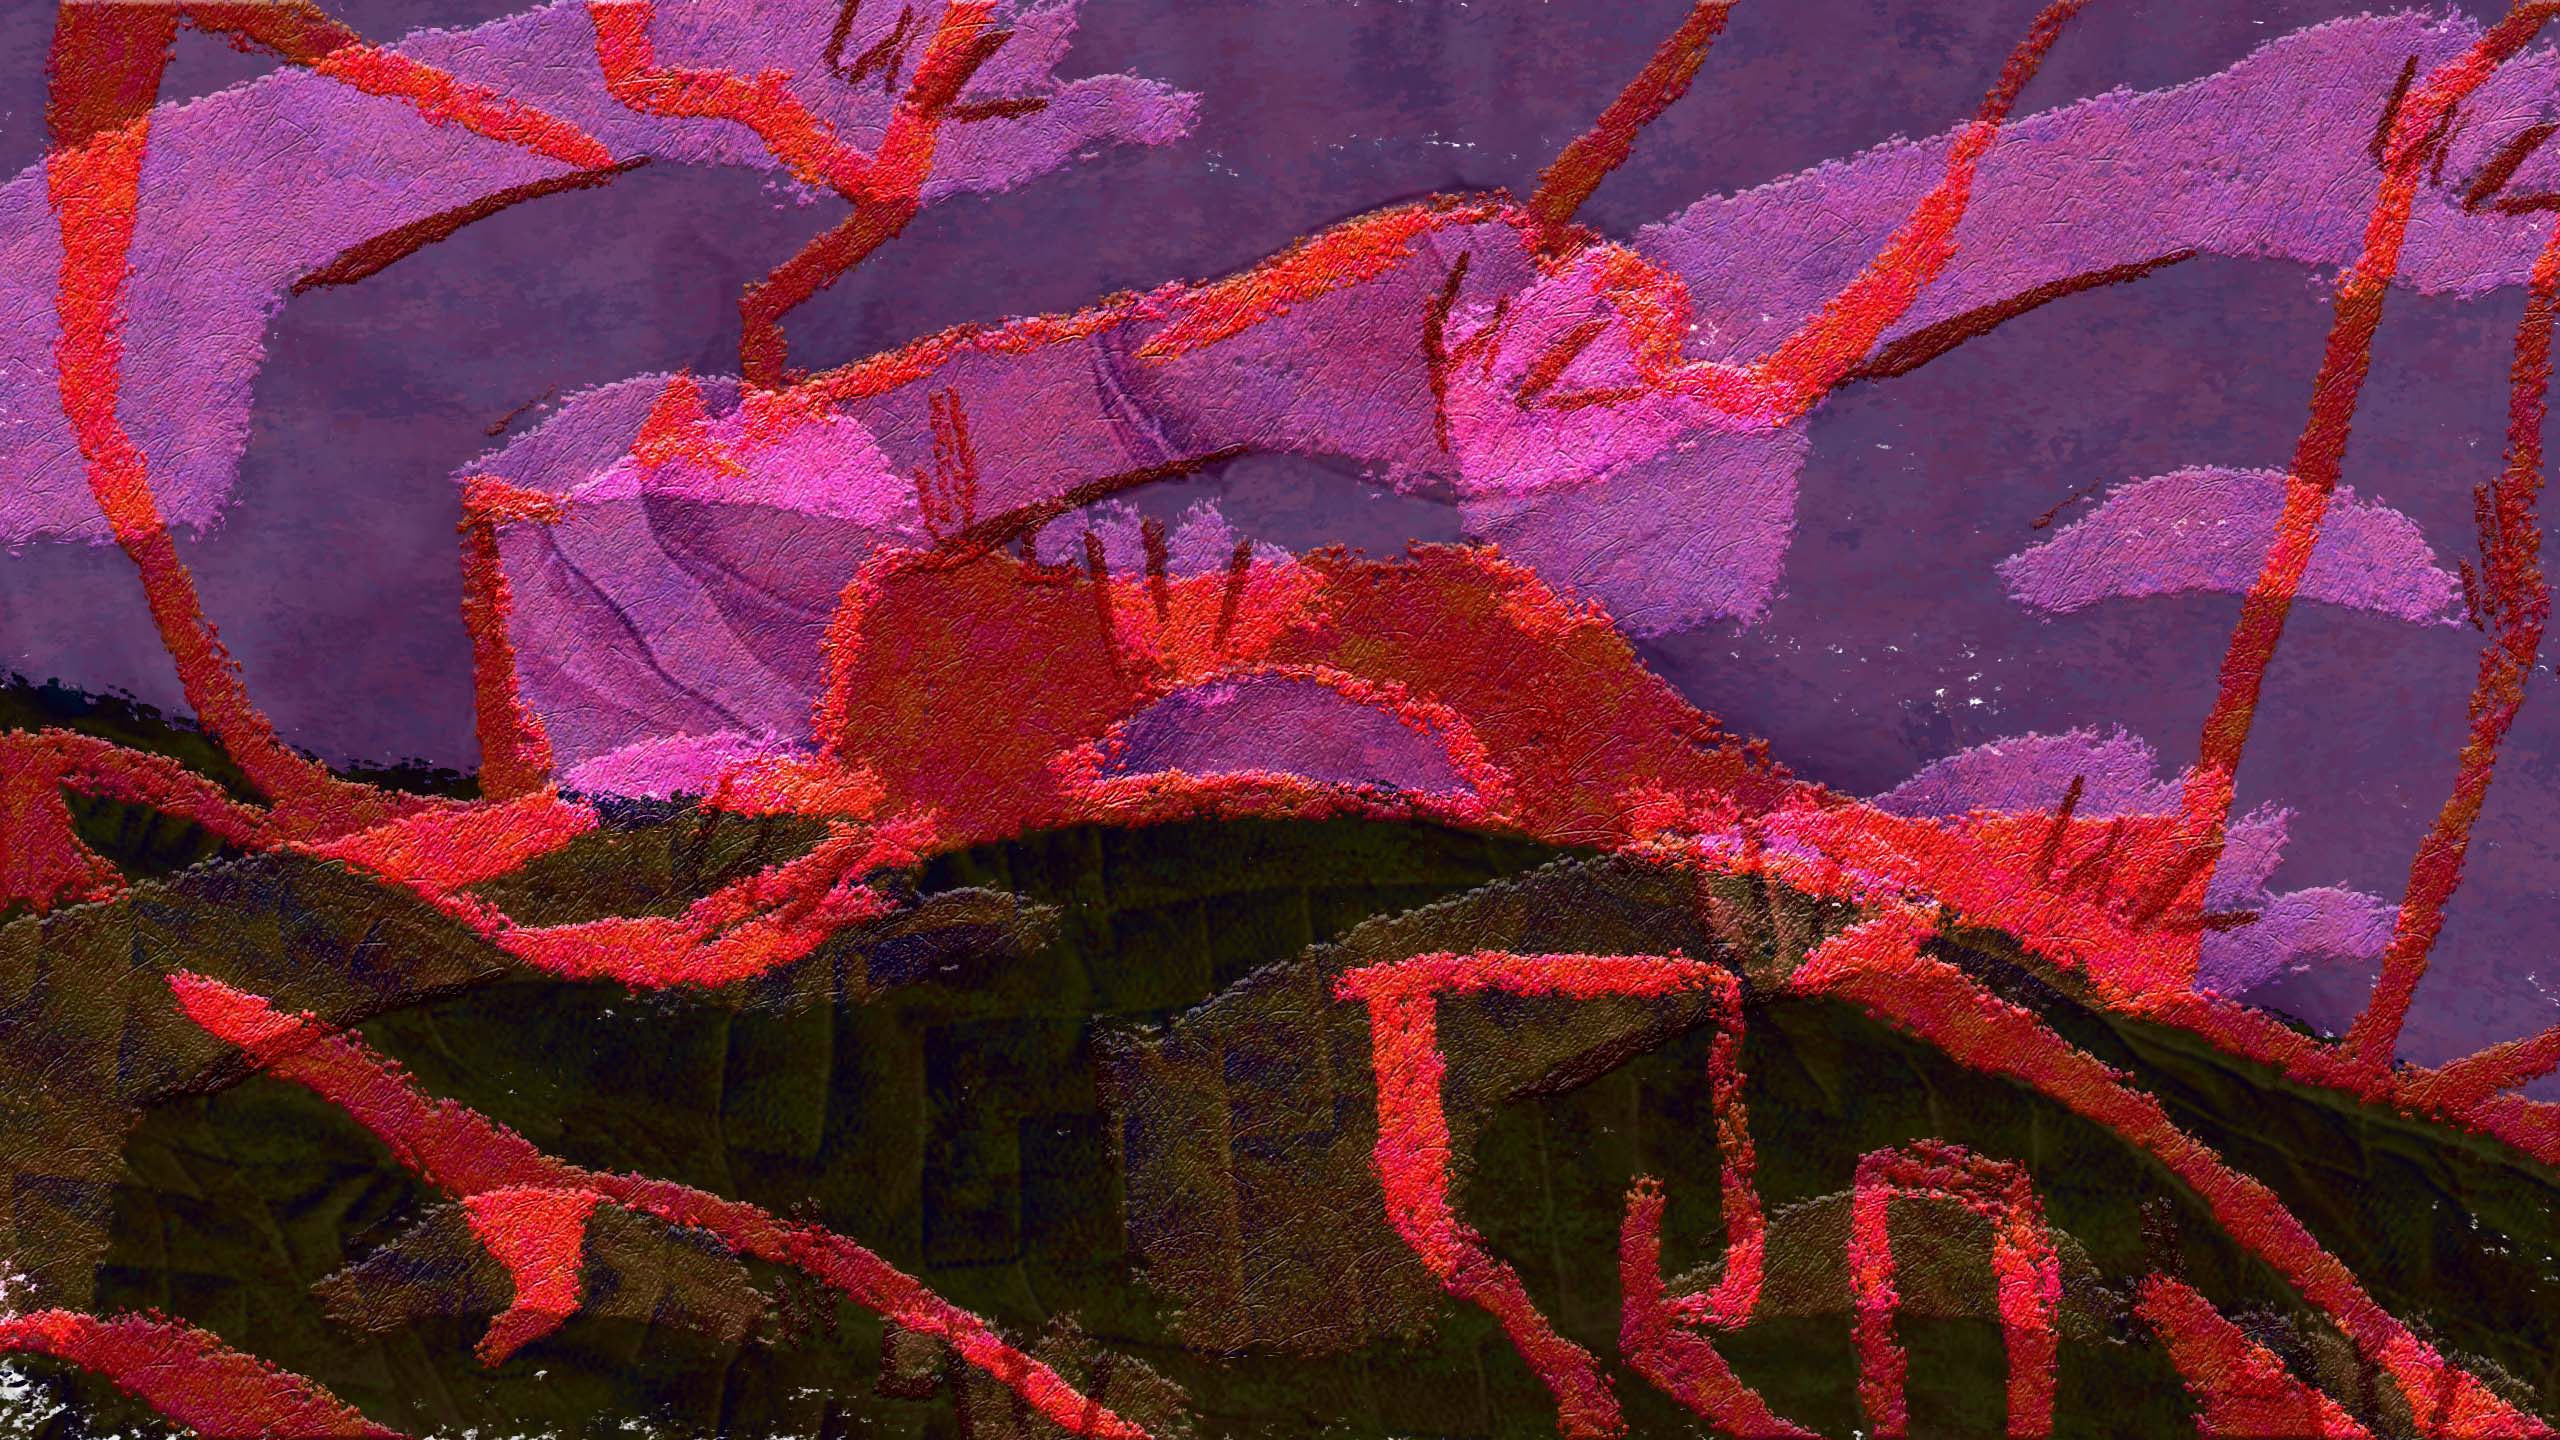 a red and purple scene with purple fists in the background